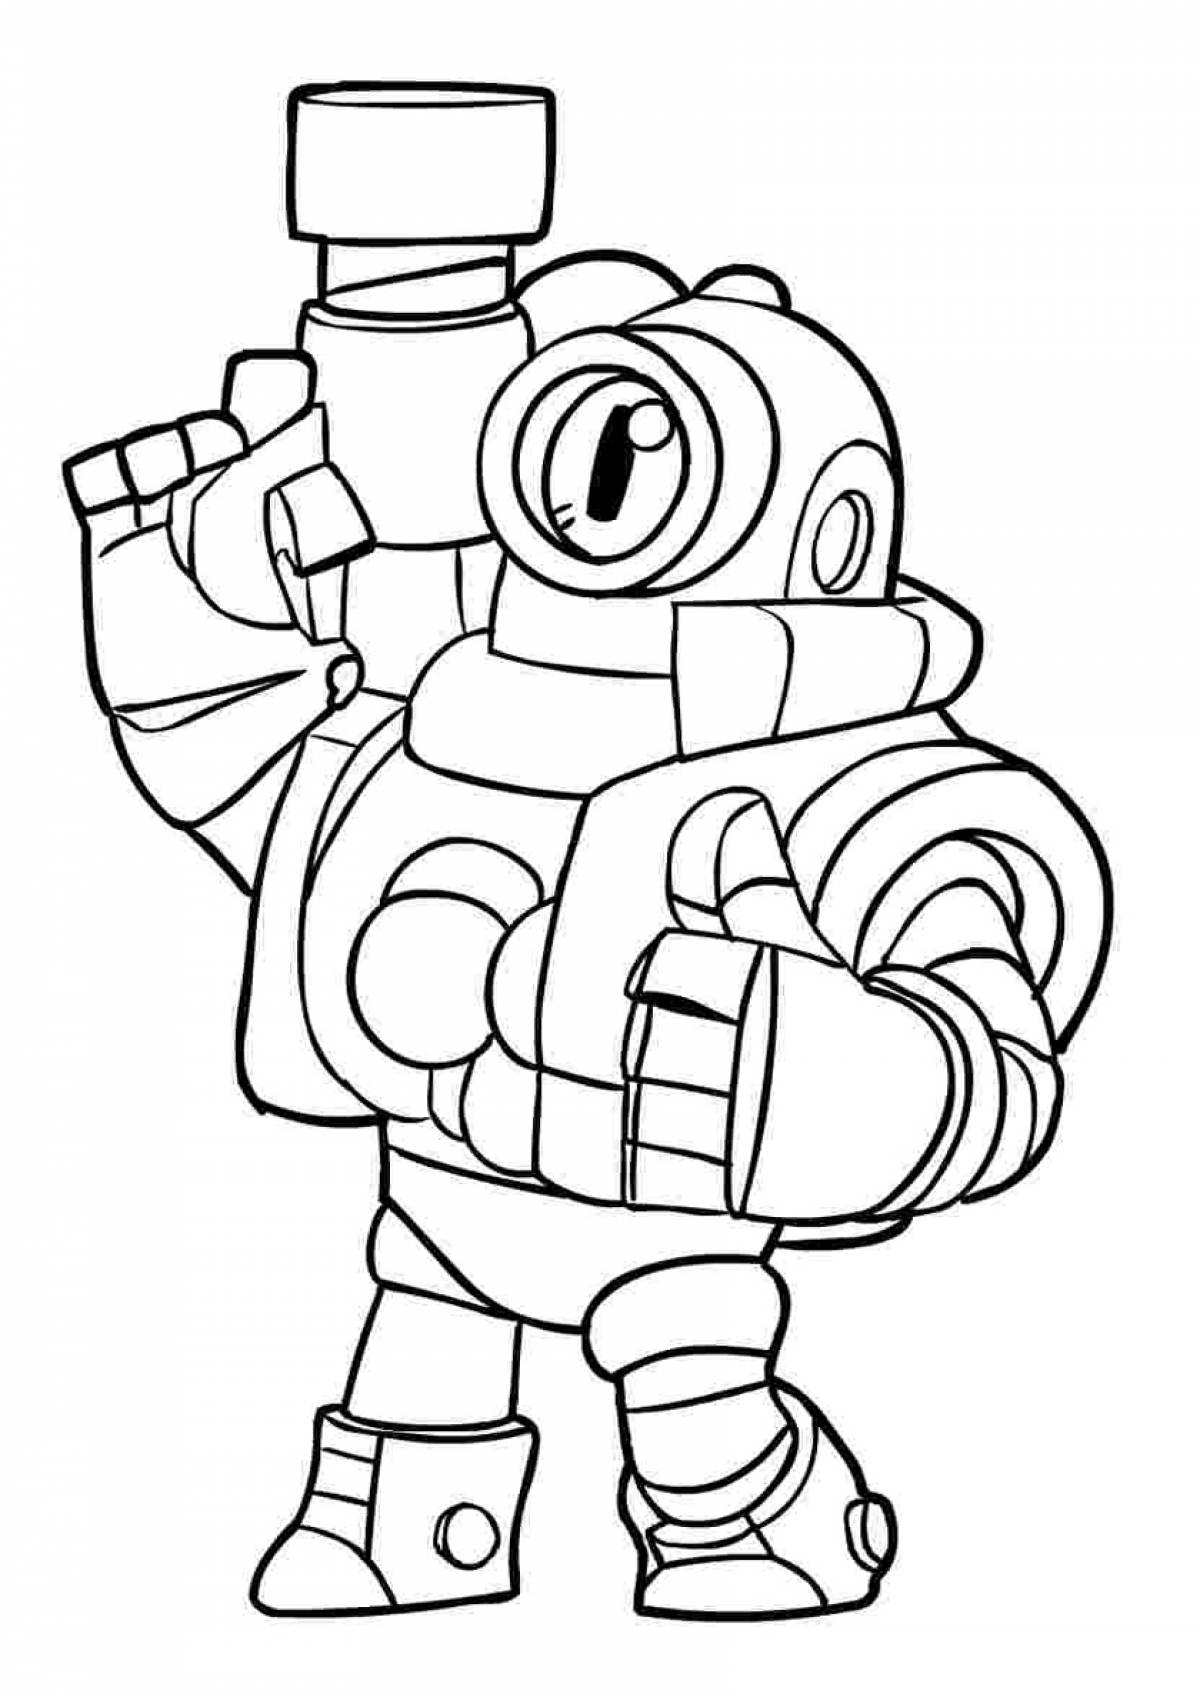 Rico in a spacesuit